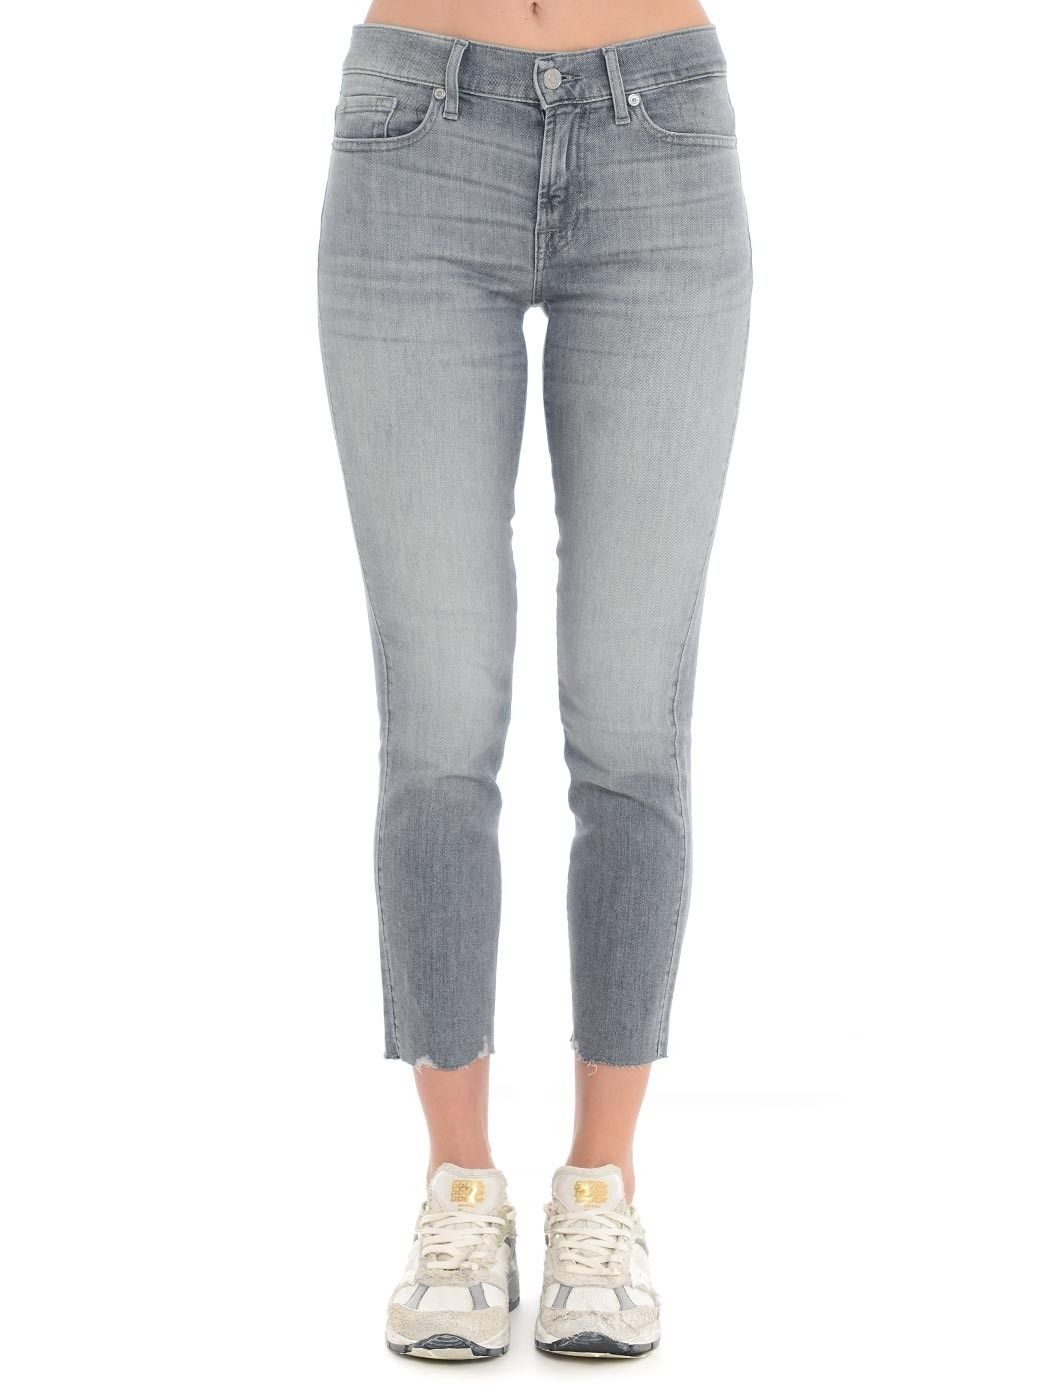  WOMENSWEAR,SPRING SUMMER COLLECTION  7 FOR ALL MANKIND JSVYR880